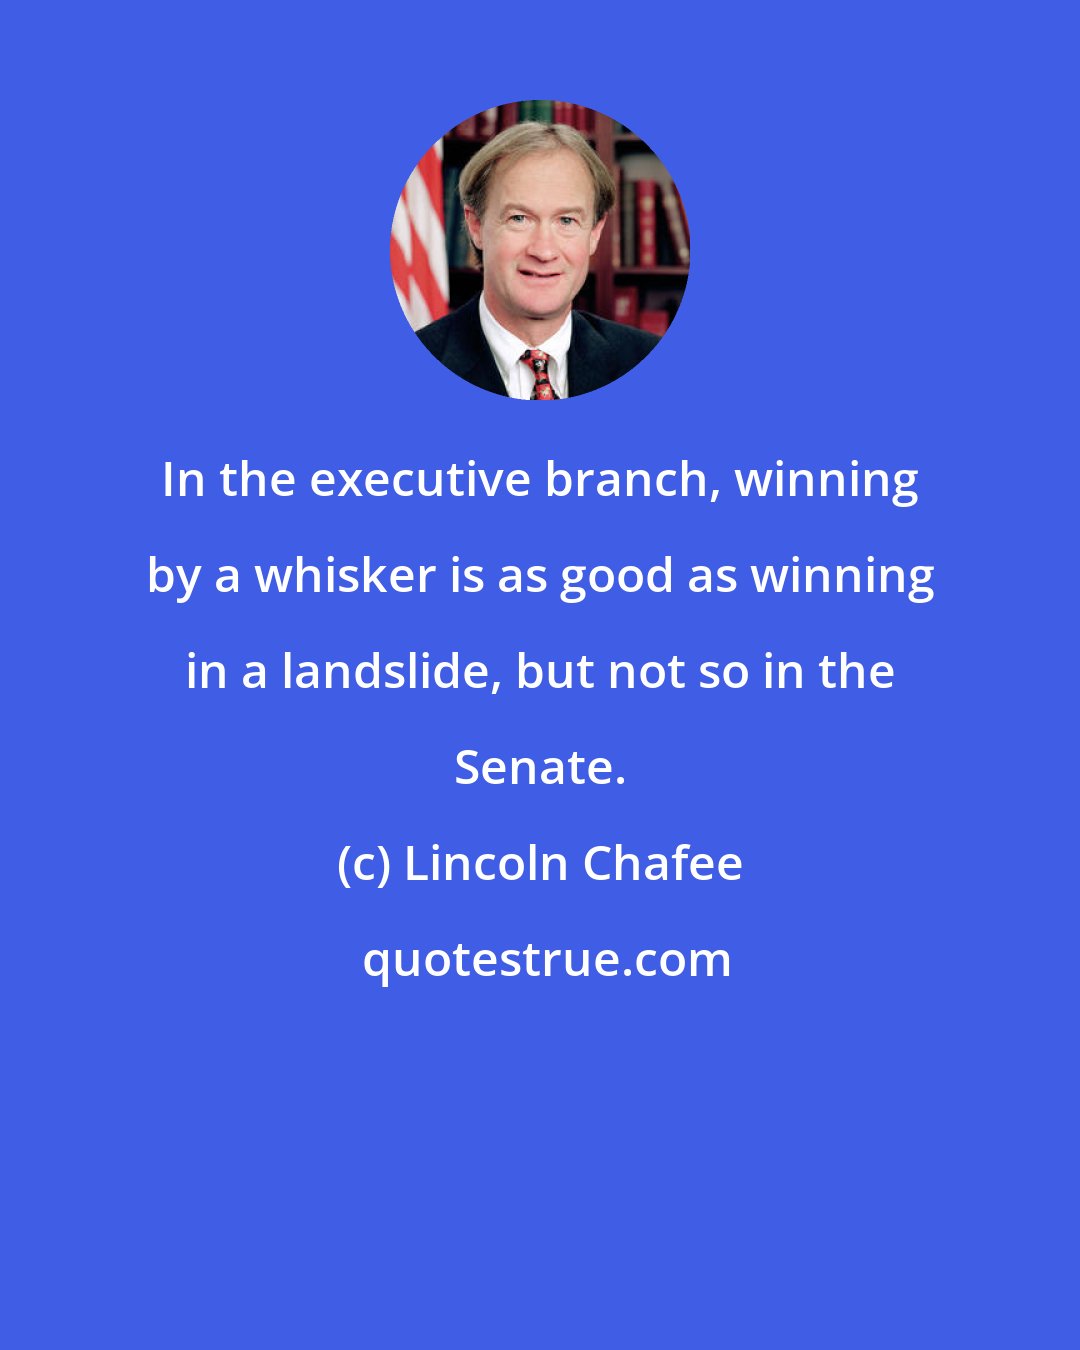 Lincoln Chafee: In the executive branch, winning by a whisker is as good as winning in a landslide, but not so in the Senate.